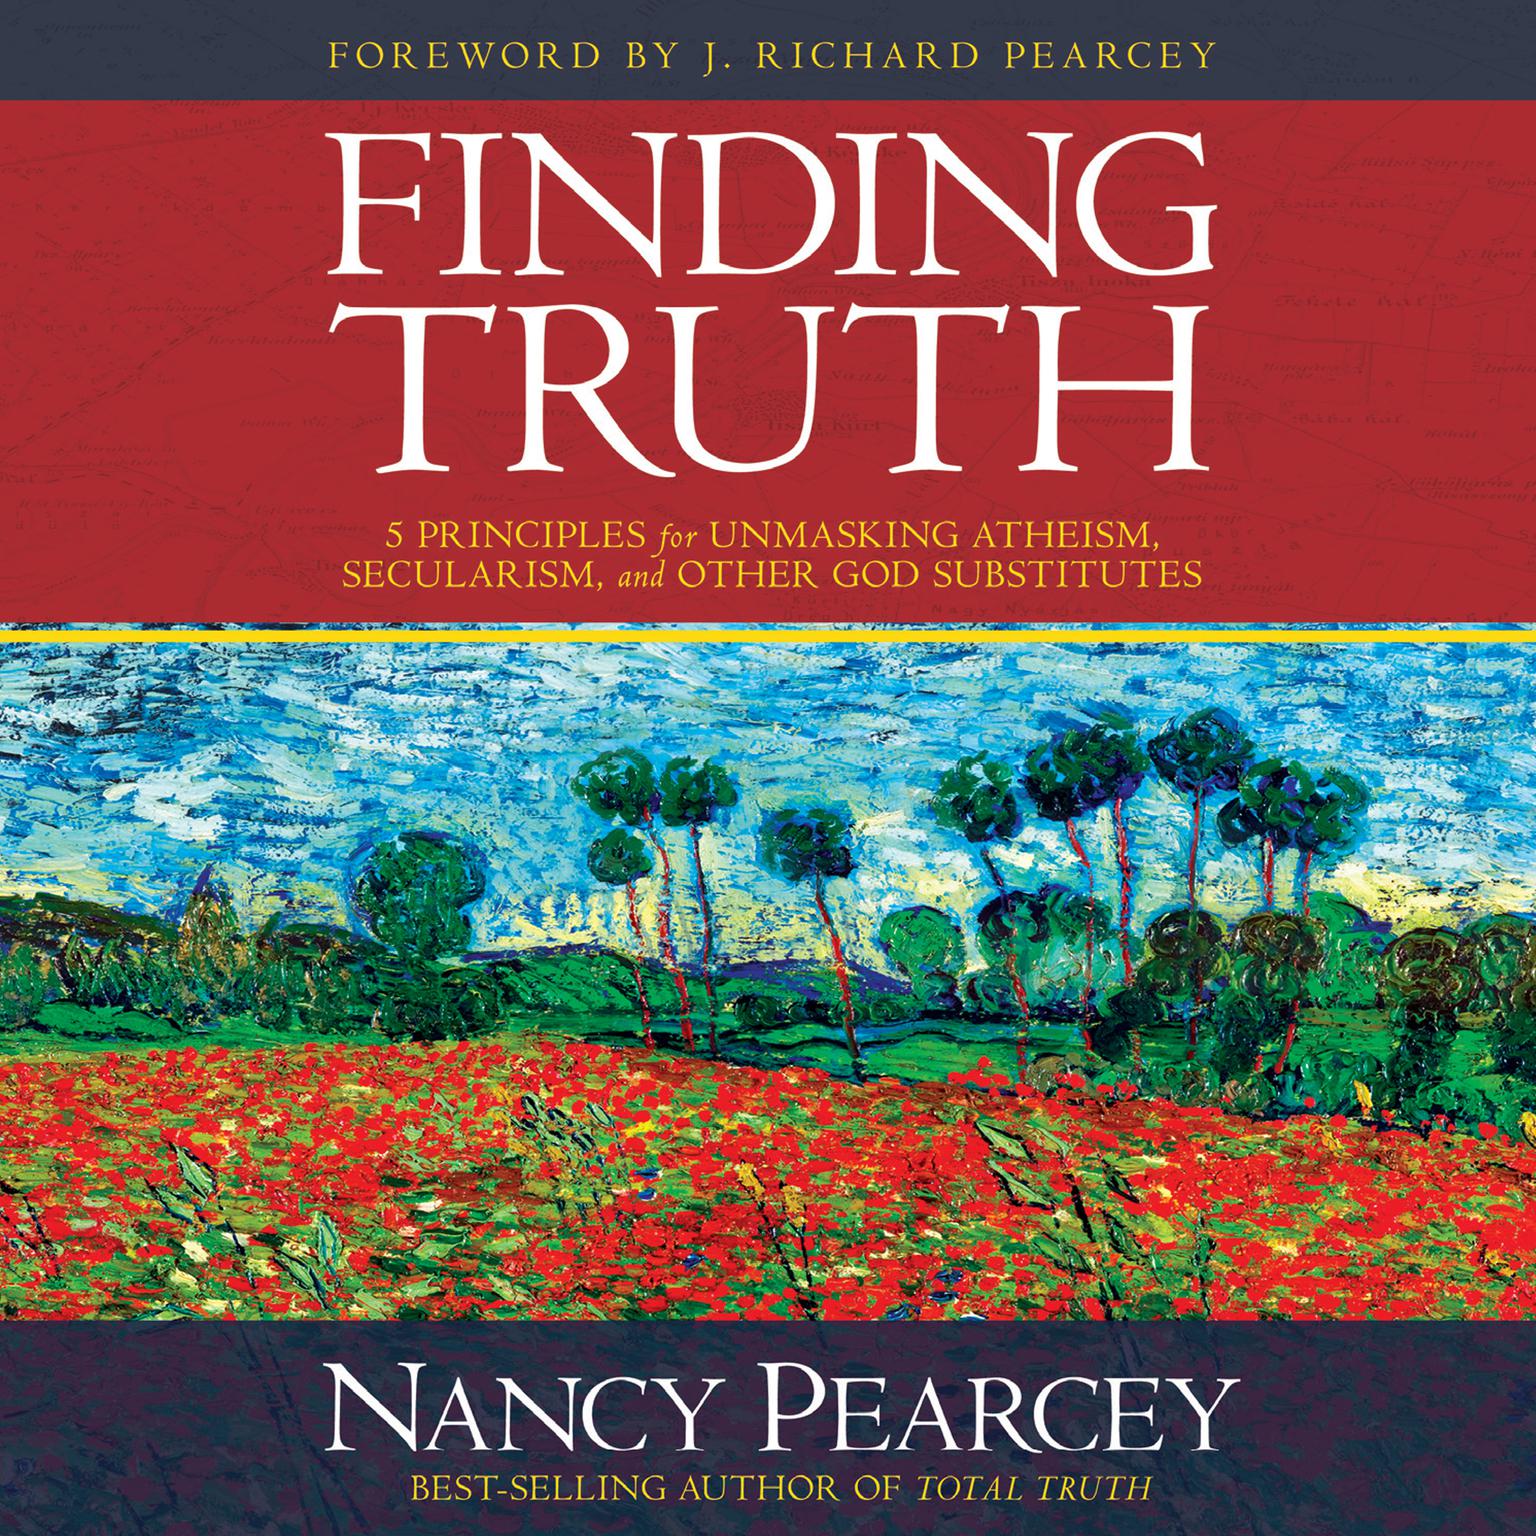 Finding Truth: 5 Principles for Unmasking Atheism, Secularism, and Other God Substitutes Audiobook, by Nancy Pearcey